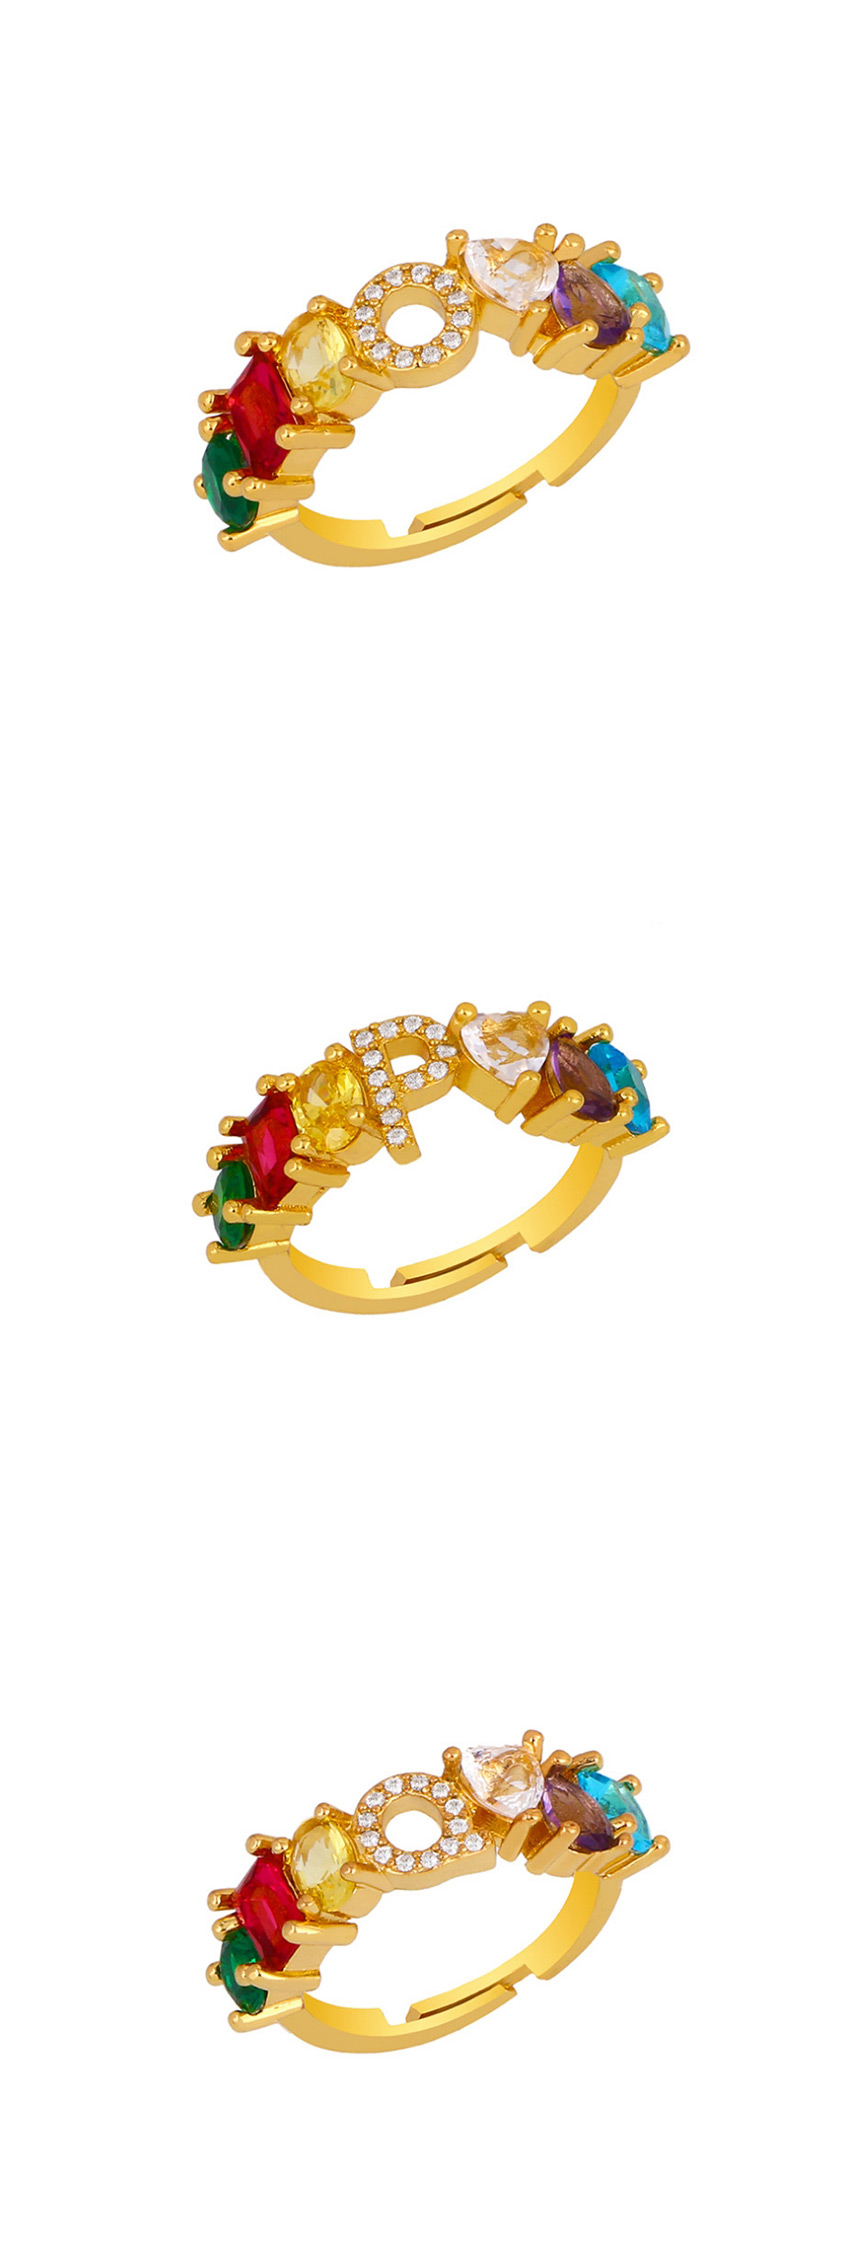 Fashion E Gold Heart-shaped Adjustable Ring With Colorful Diamond Letters,Rings